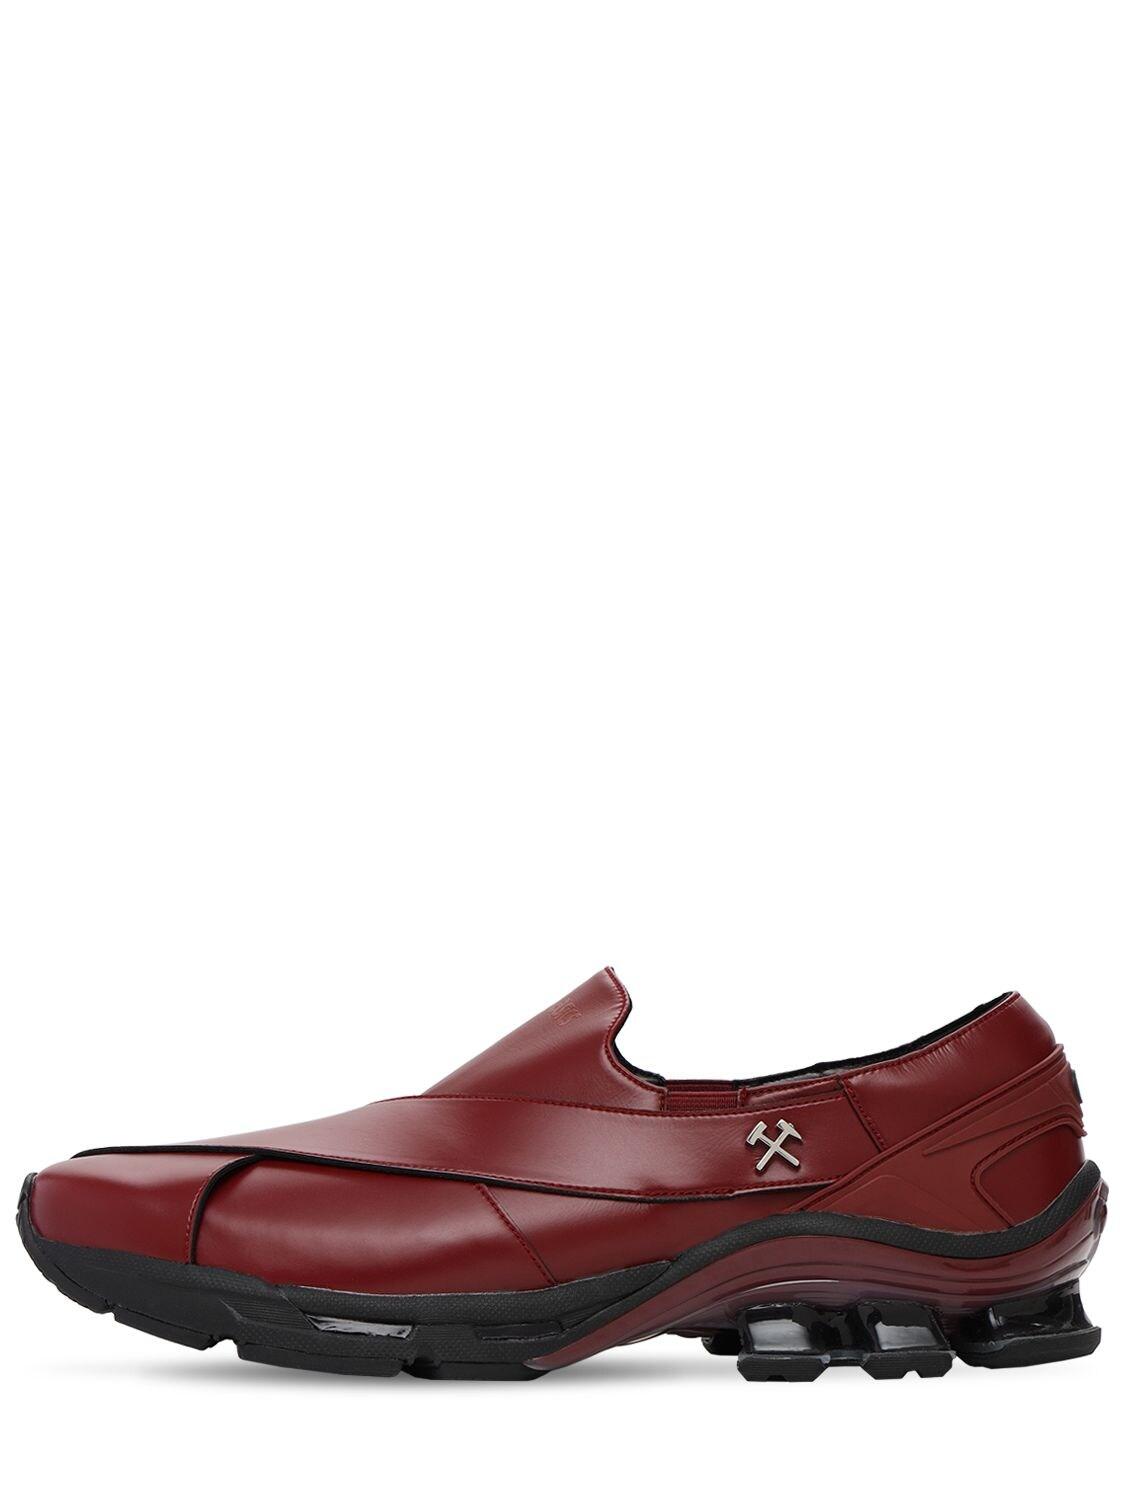 Asics Gmbh Gel-chappal Slip-on Sneakers in Red for Men | Lyst